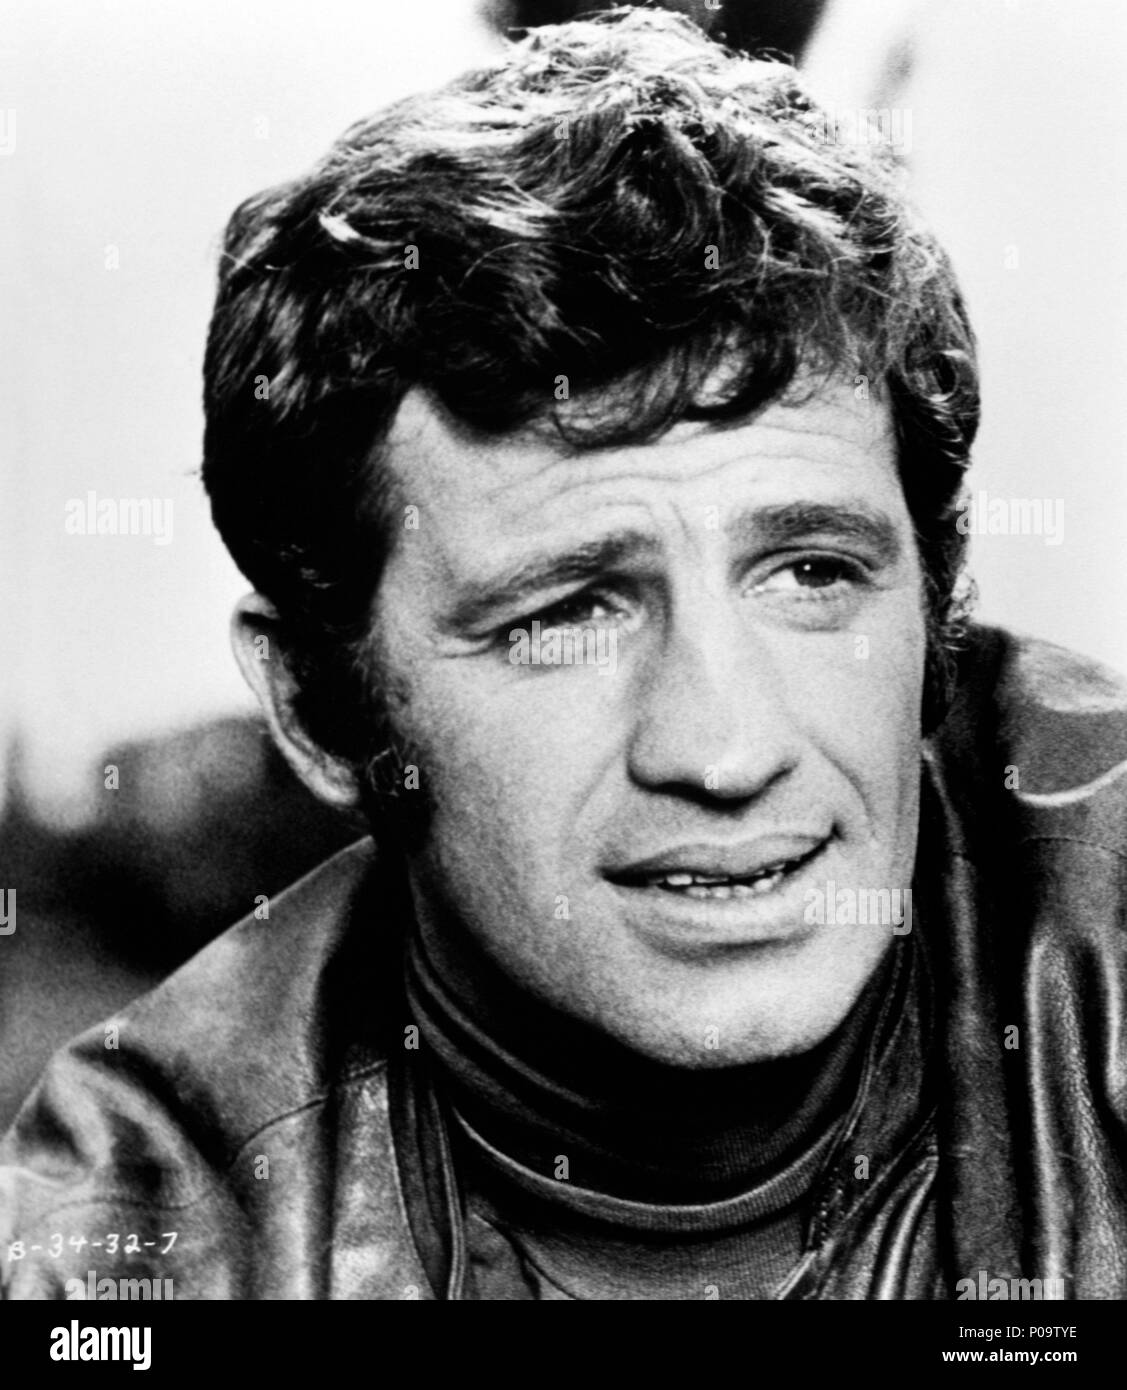 Jean Paul Belmondo High Resolution Stock Photography and Images - Alamy